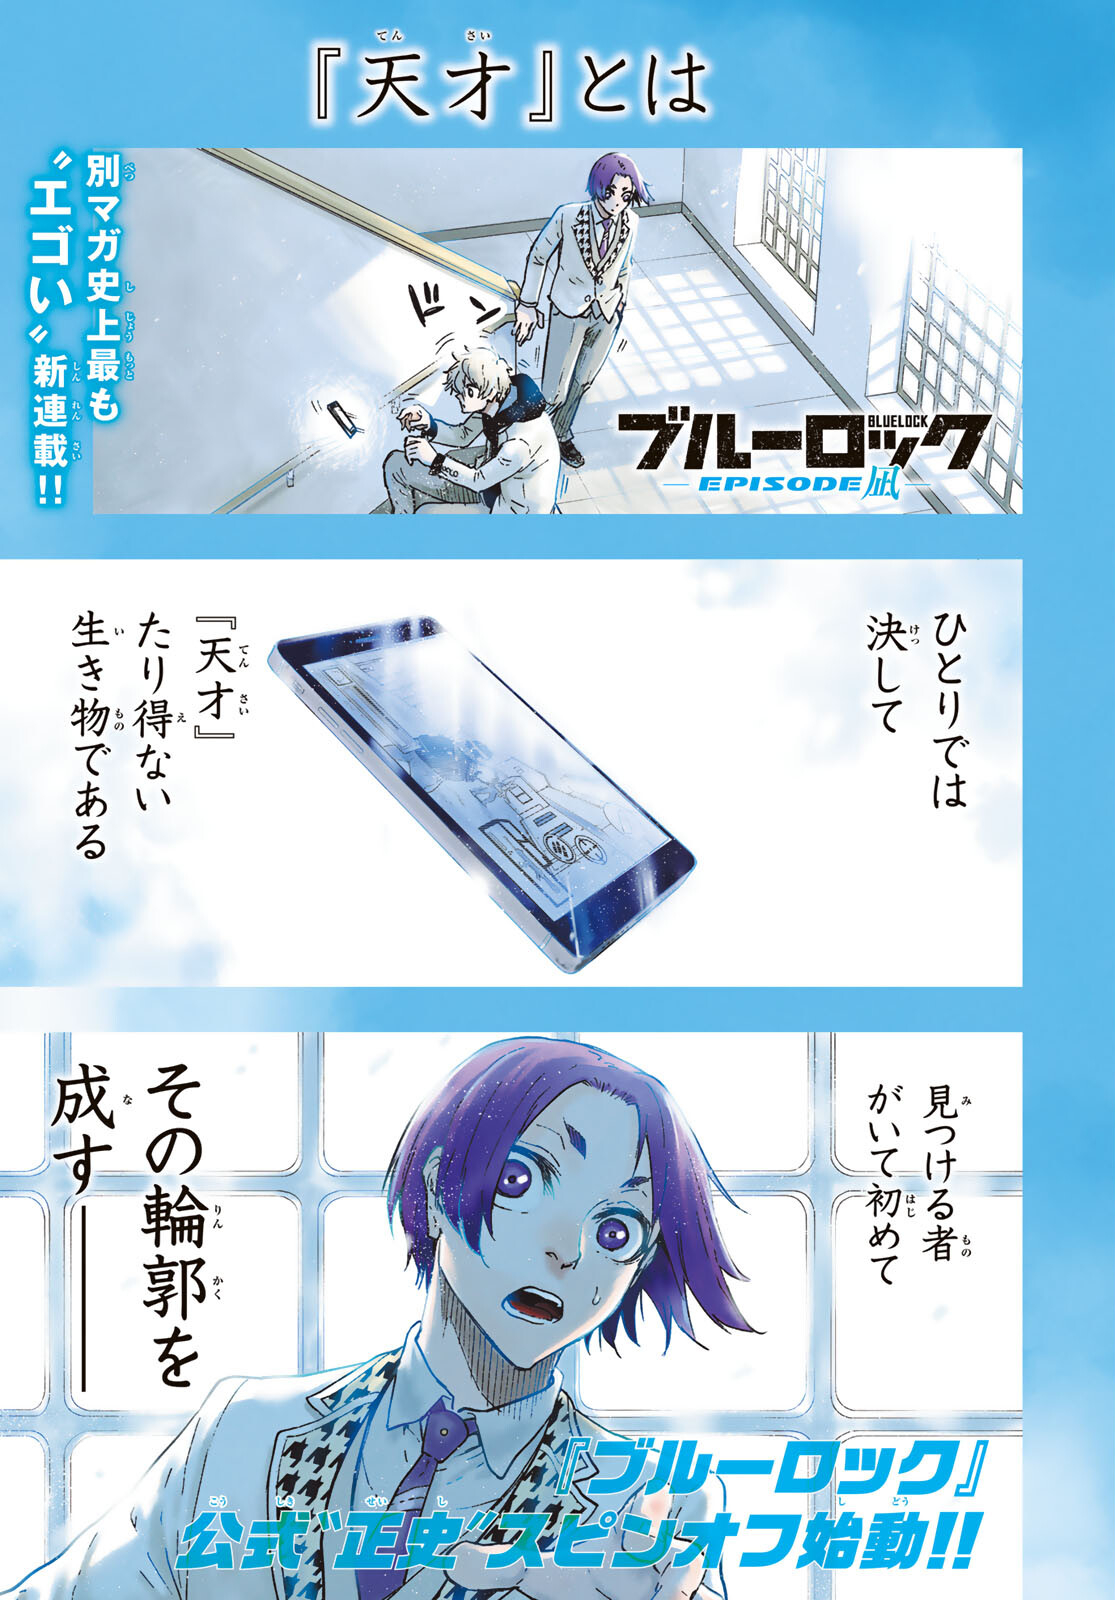 Blue Lock Spinoff Novel Series Gets 2nd Novel in January, 3rd